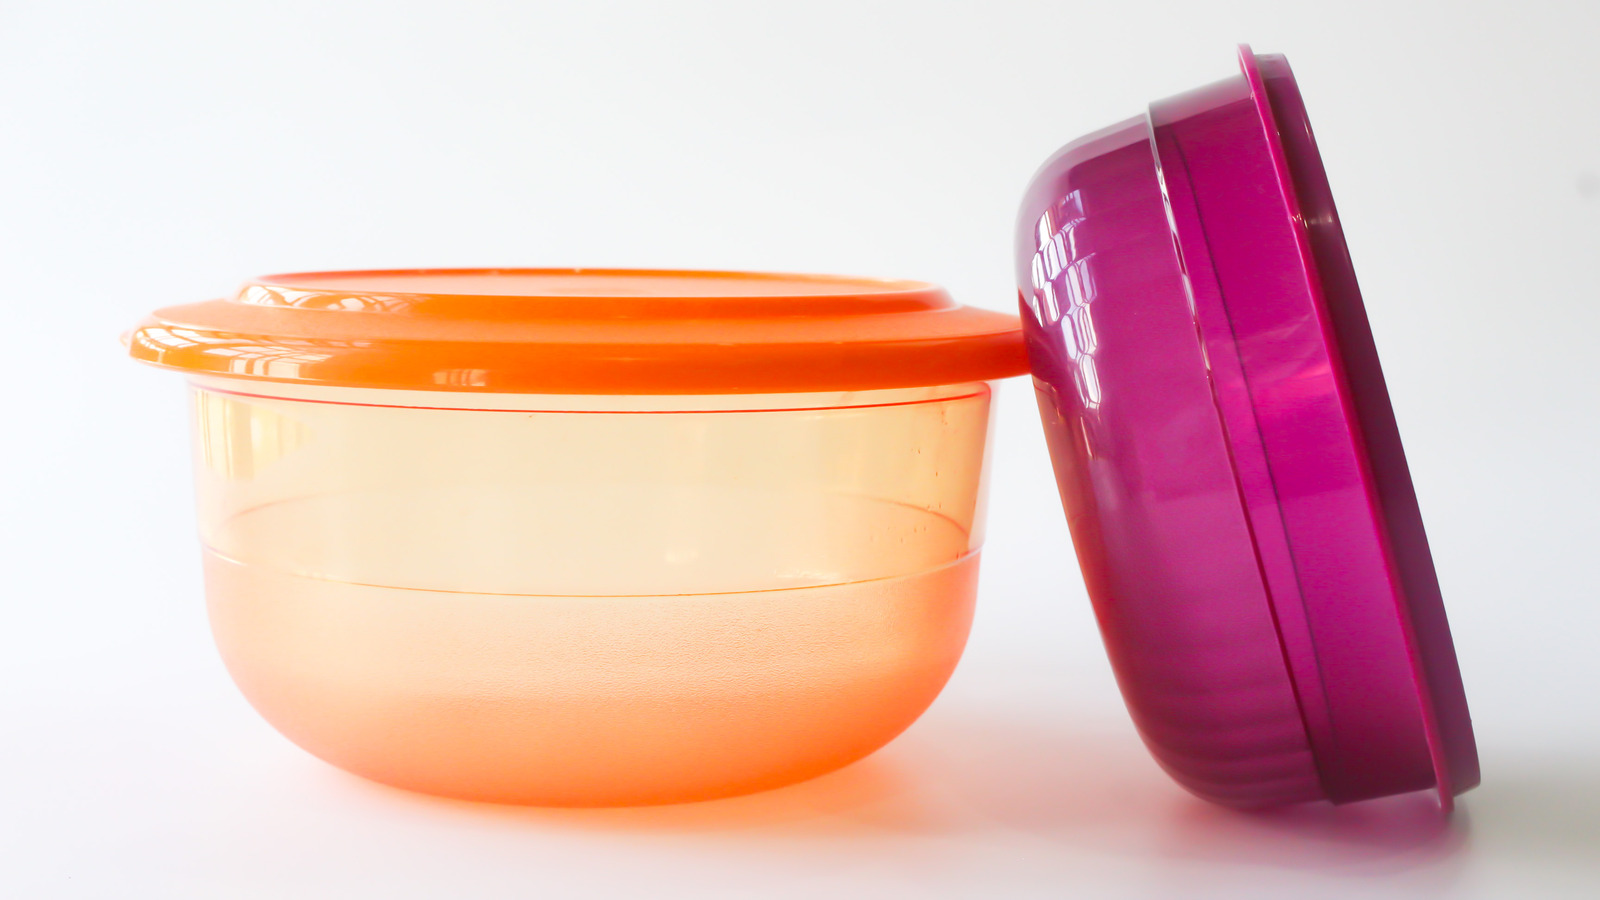 The Best Way To Clean Plastic Containers In The Dishwasher